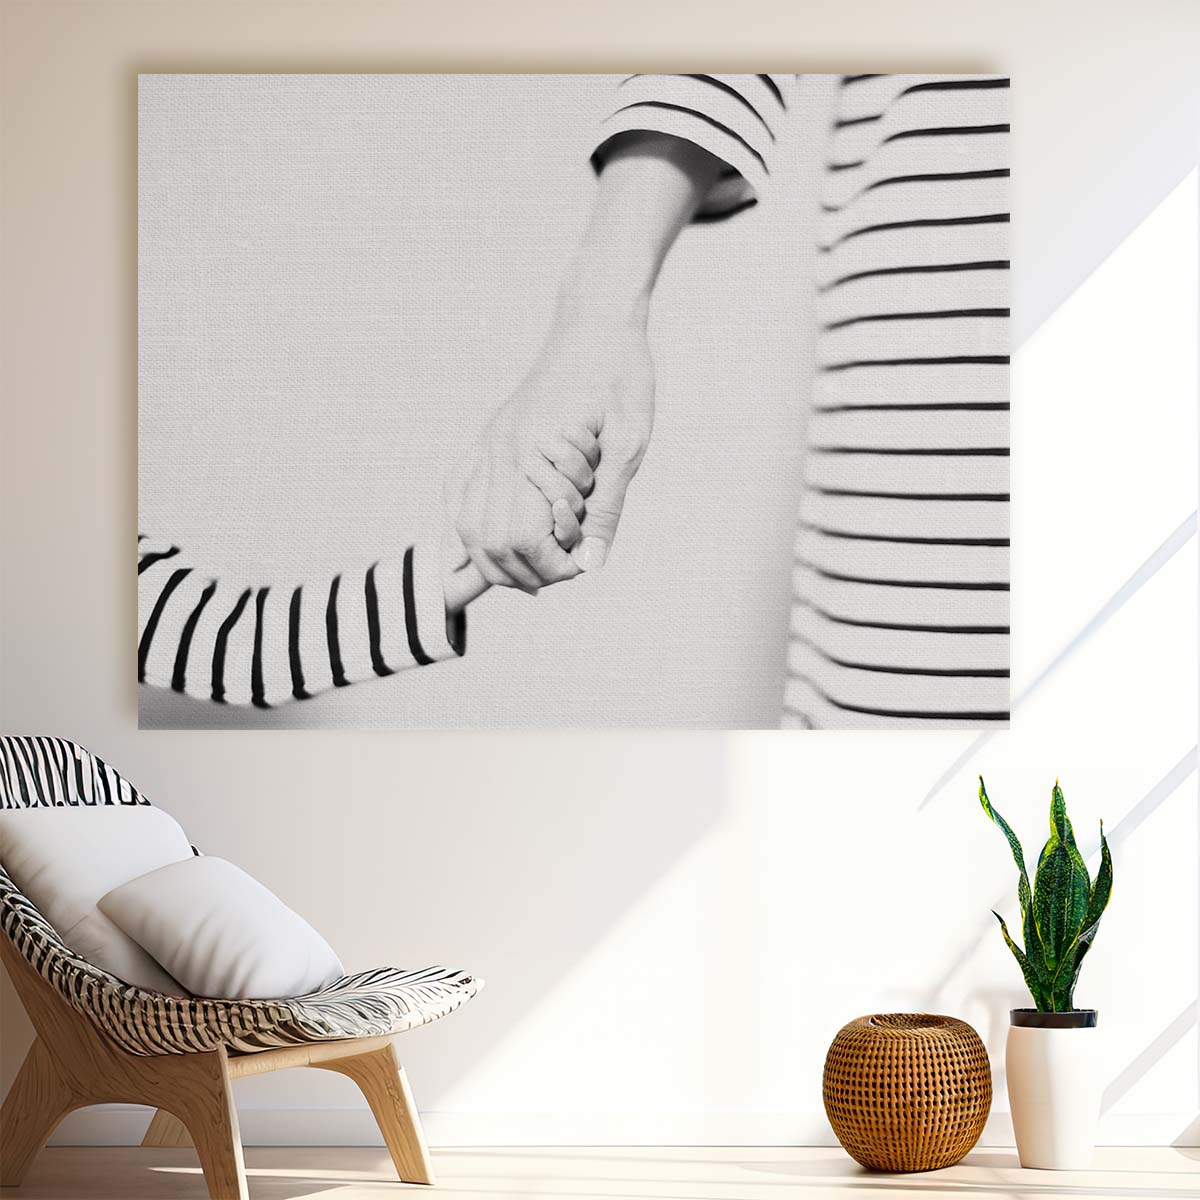 Monochrome Mother and Daughter Holding Hands Wall Art by Luxuriance Designs. Made in USA.